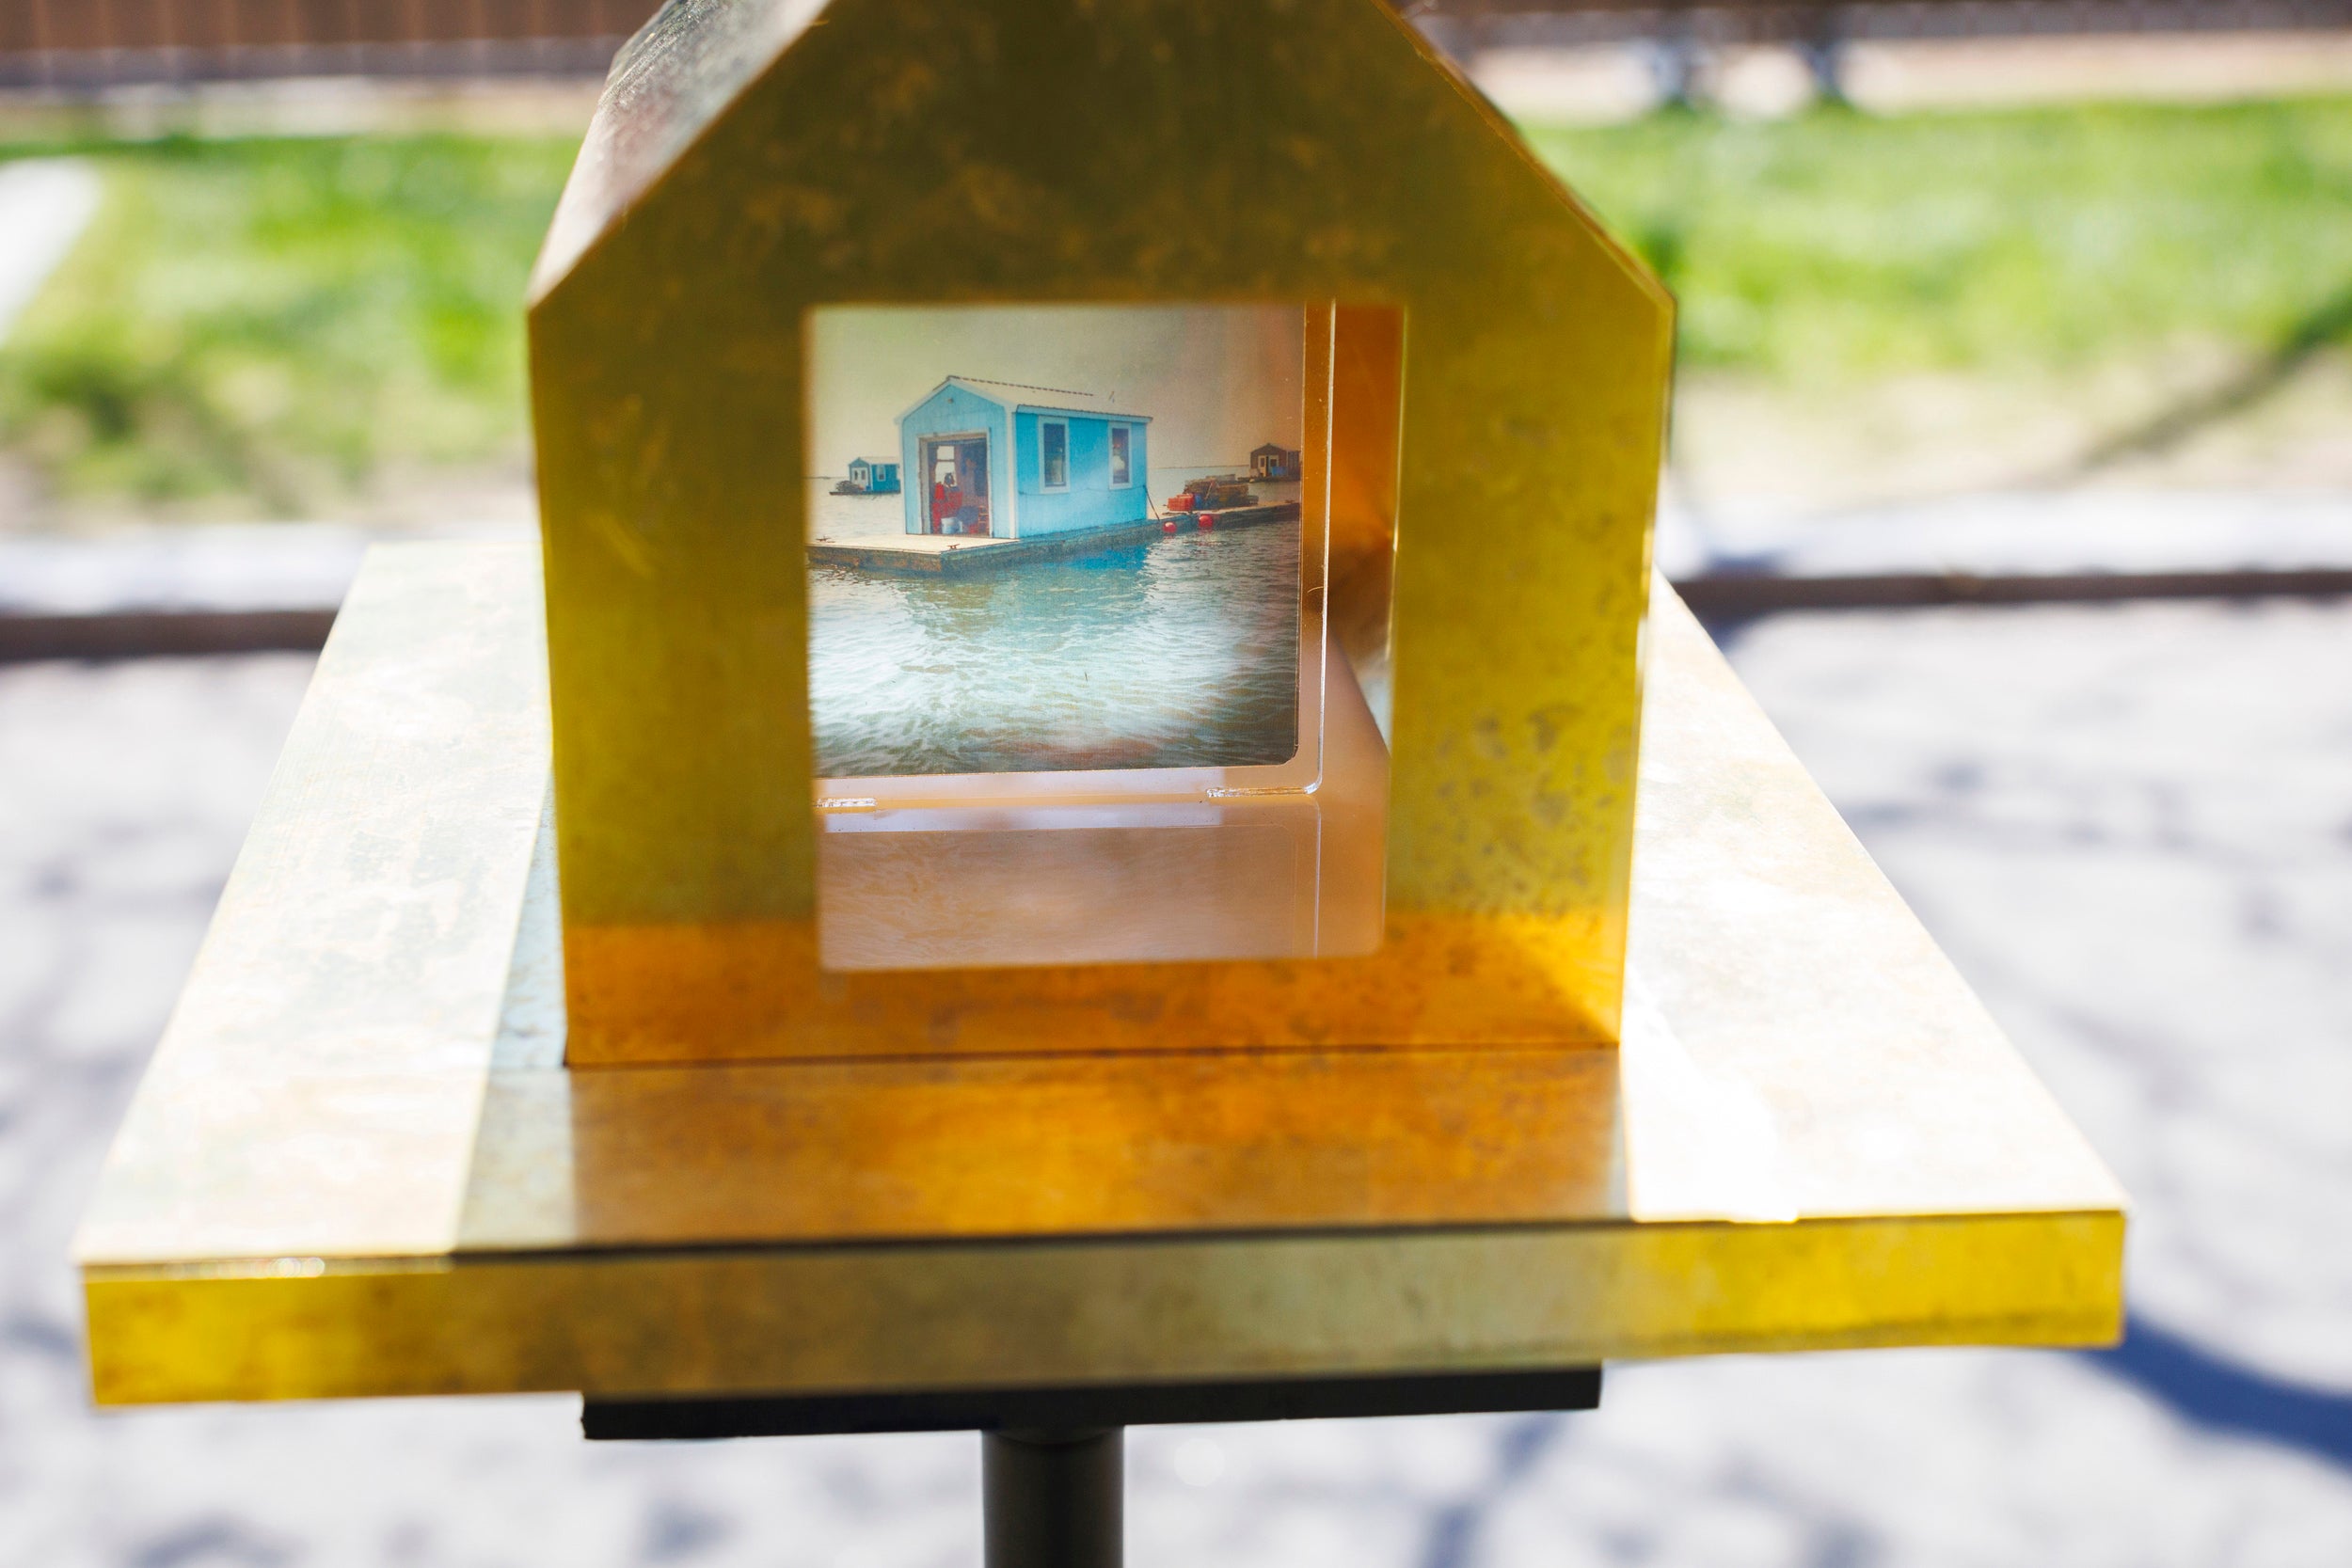 A detail image of a public art installation called “Oyster Floats, Camera Obscuras for a Floating City” by Randy Crandon GSD ’25 and Dylan Herrmann-Holt GSD ’25 is pictured alongside Memorial Hall.